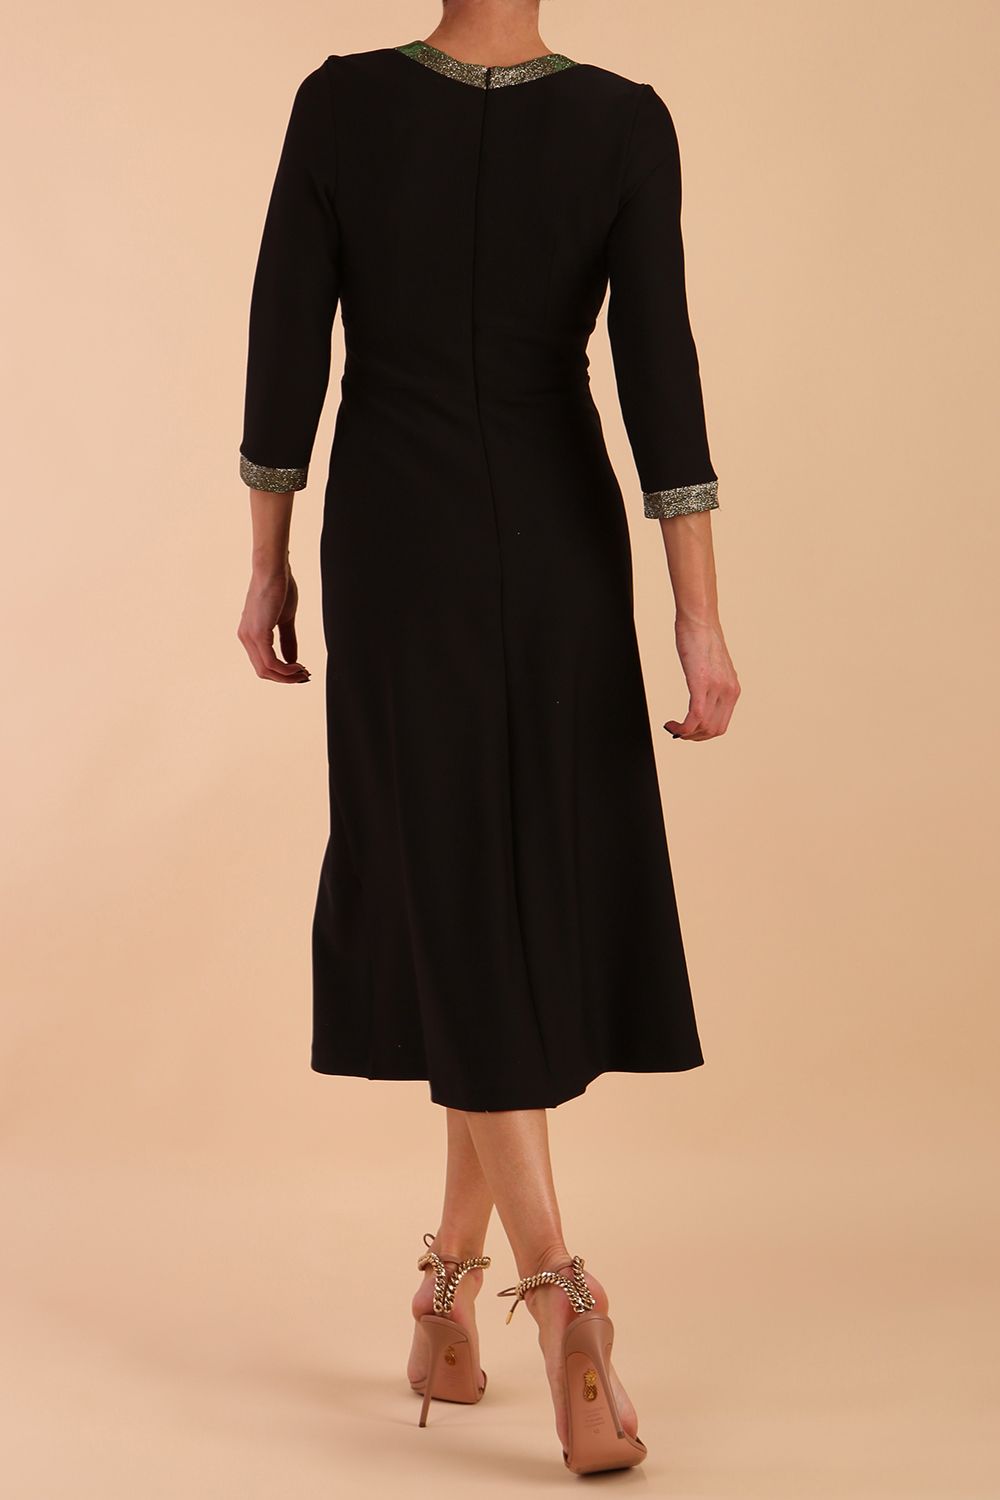 model is wearing diva catwalk carolyn swing midi dress with a band and glitter detail on sleeves and around the neckline in black and sherwood glitter back